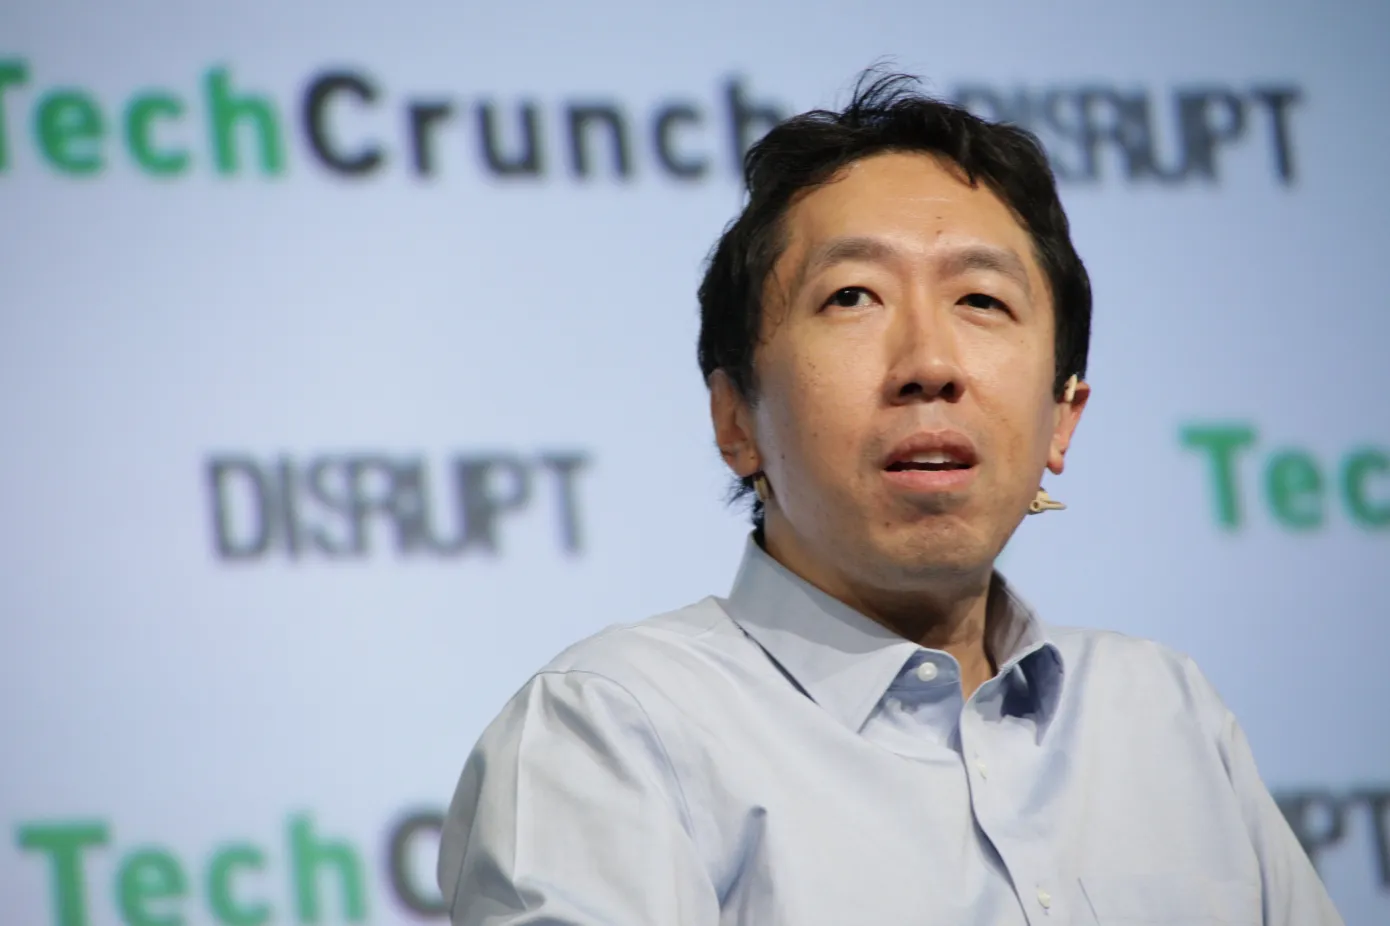 Amazon has brought in AI expert Andrew Ng to its board of directors in the midst of the generative AI race